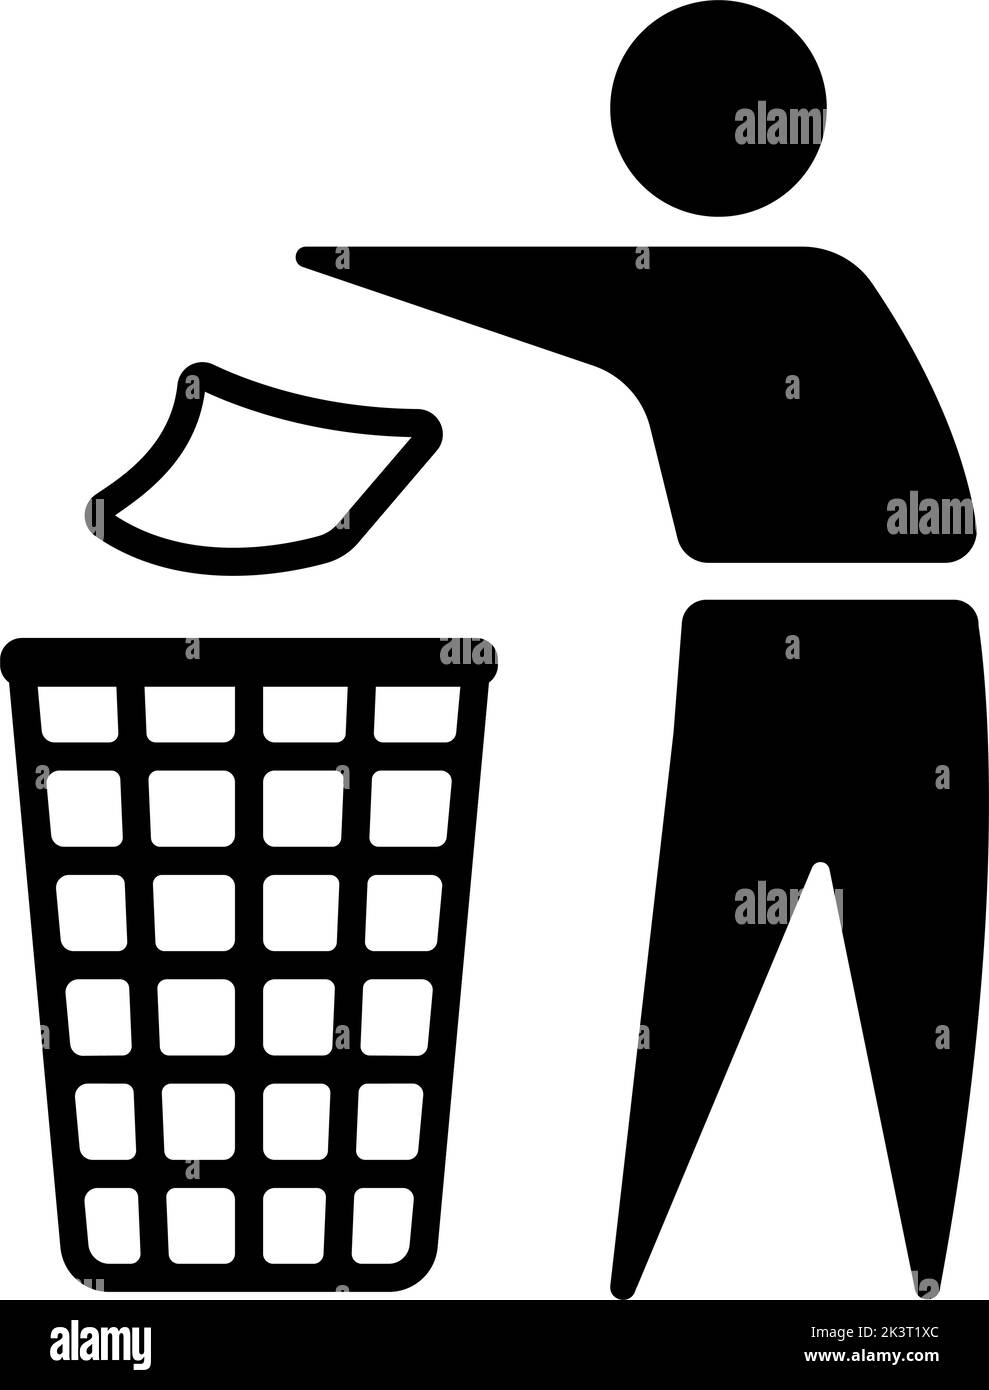 Recycling Symbols For Plastic. Vector icon illustration Stock Vector